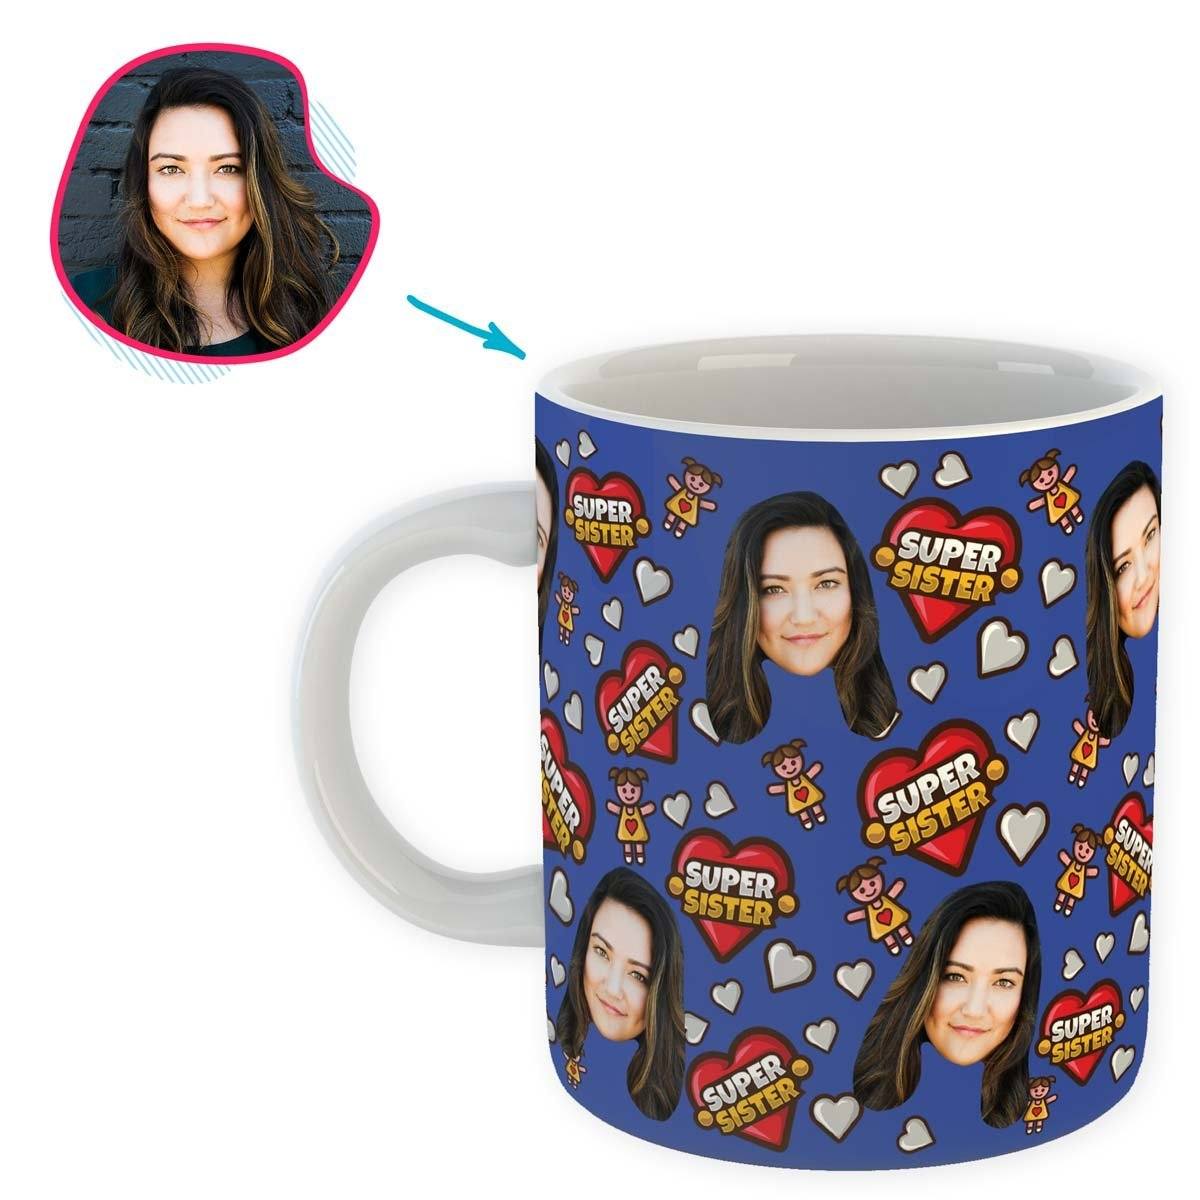 darkblue Super Sister mug personalized with photo of face printed on it